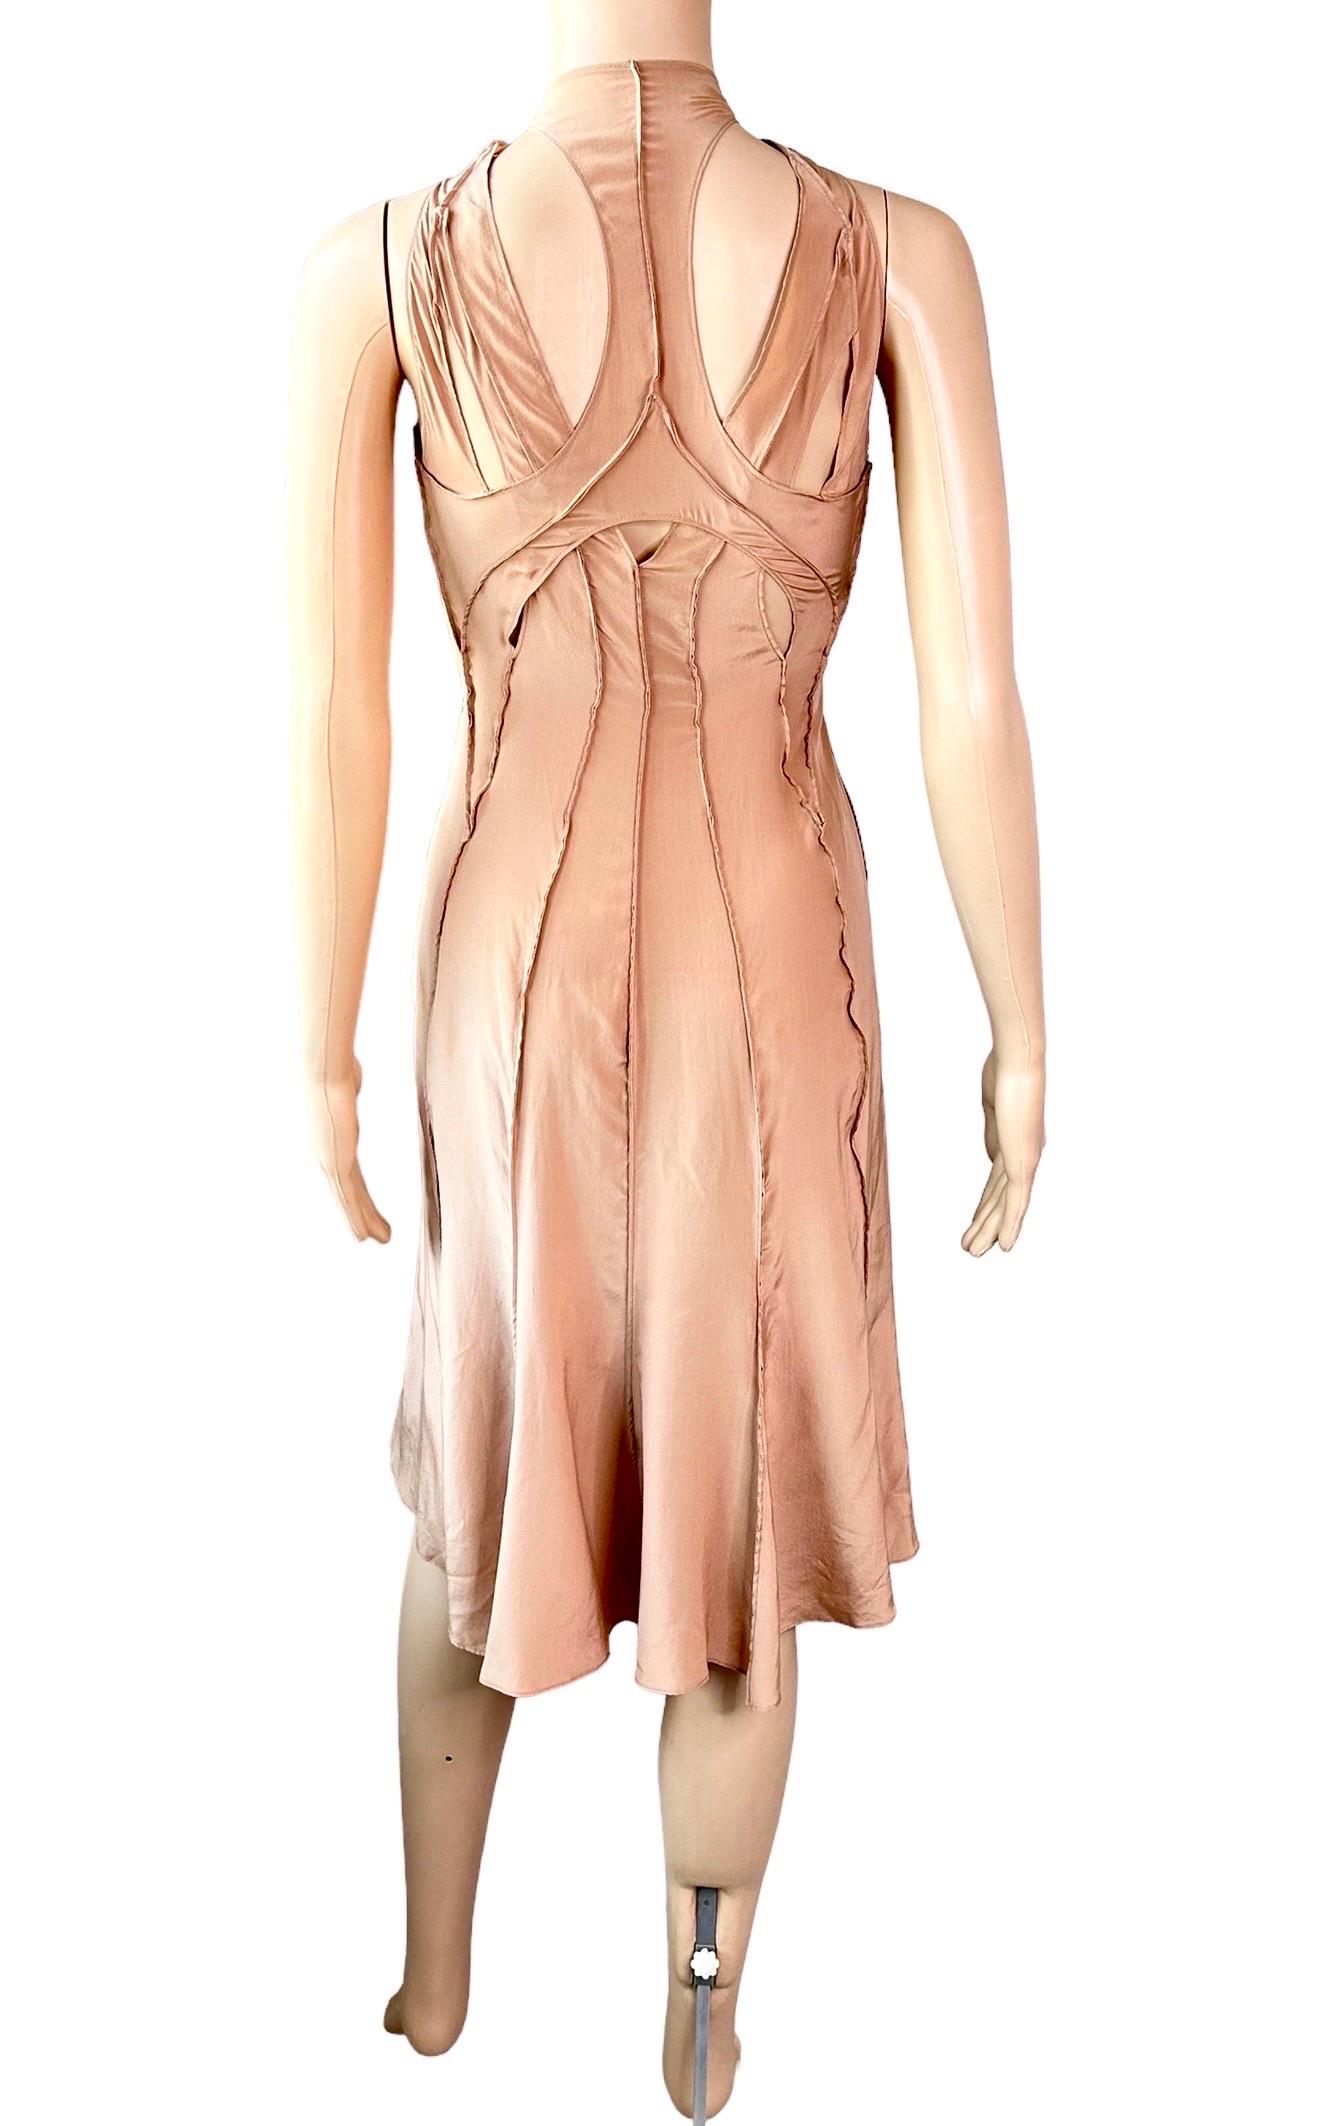 Tom Ford for Yves Saint Laurent YSL S/S 2003 Runway Cutout Silk Dress FR 40

Look 1 from the Spring 2003 Collection.
